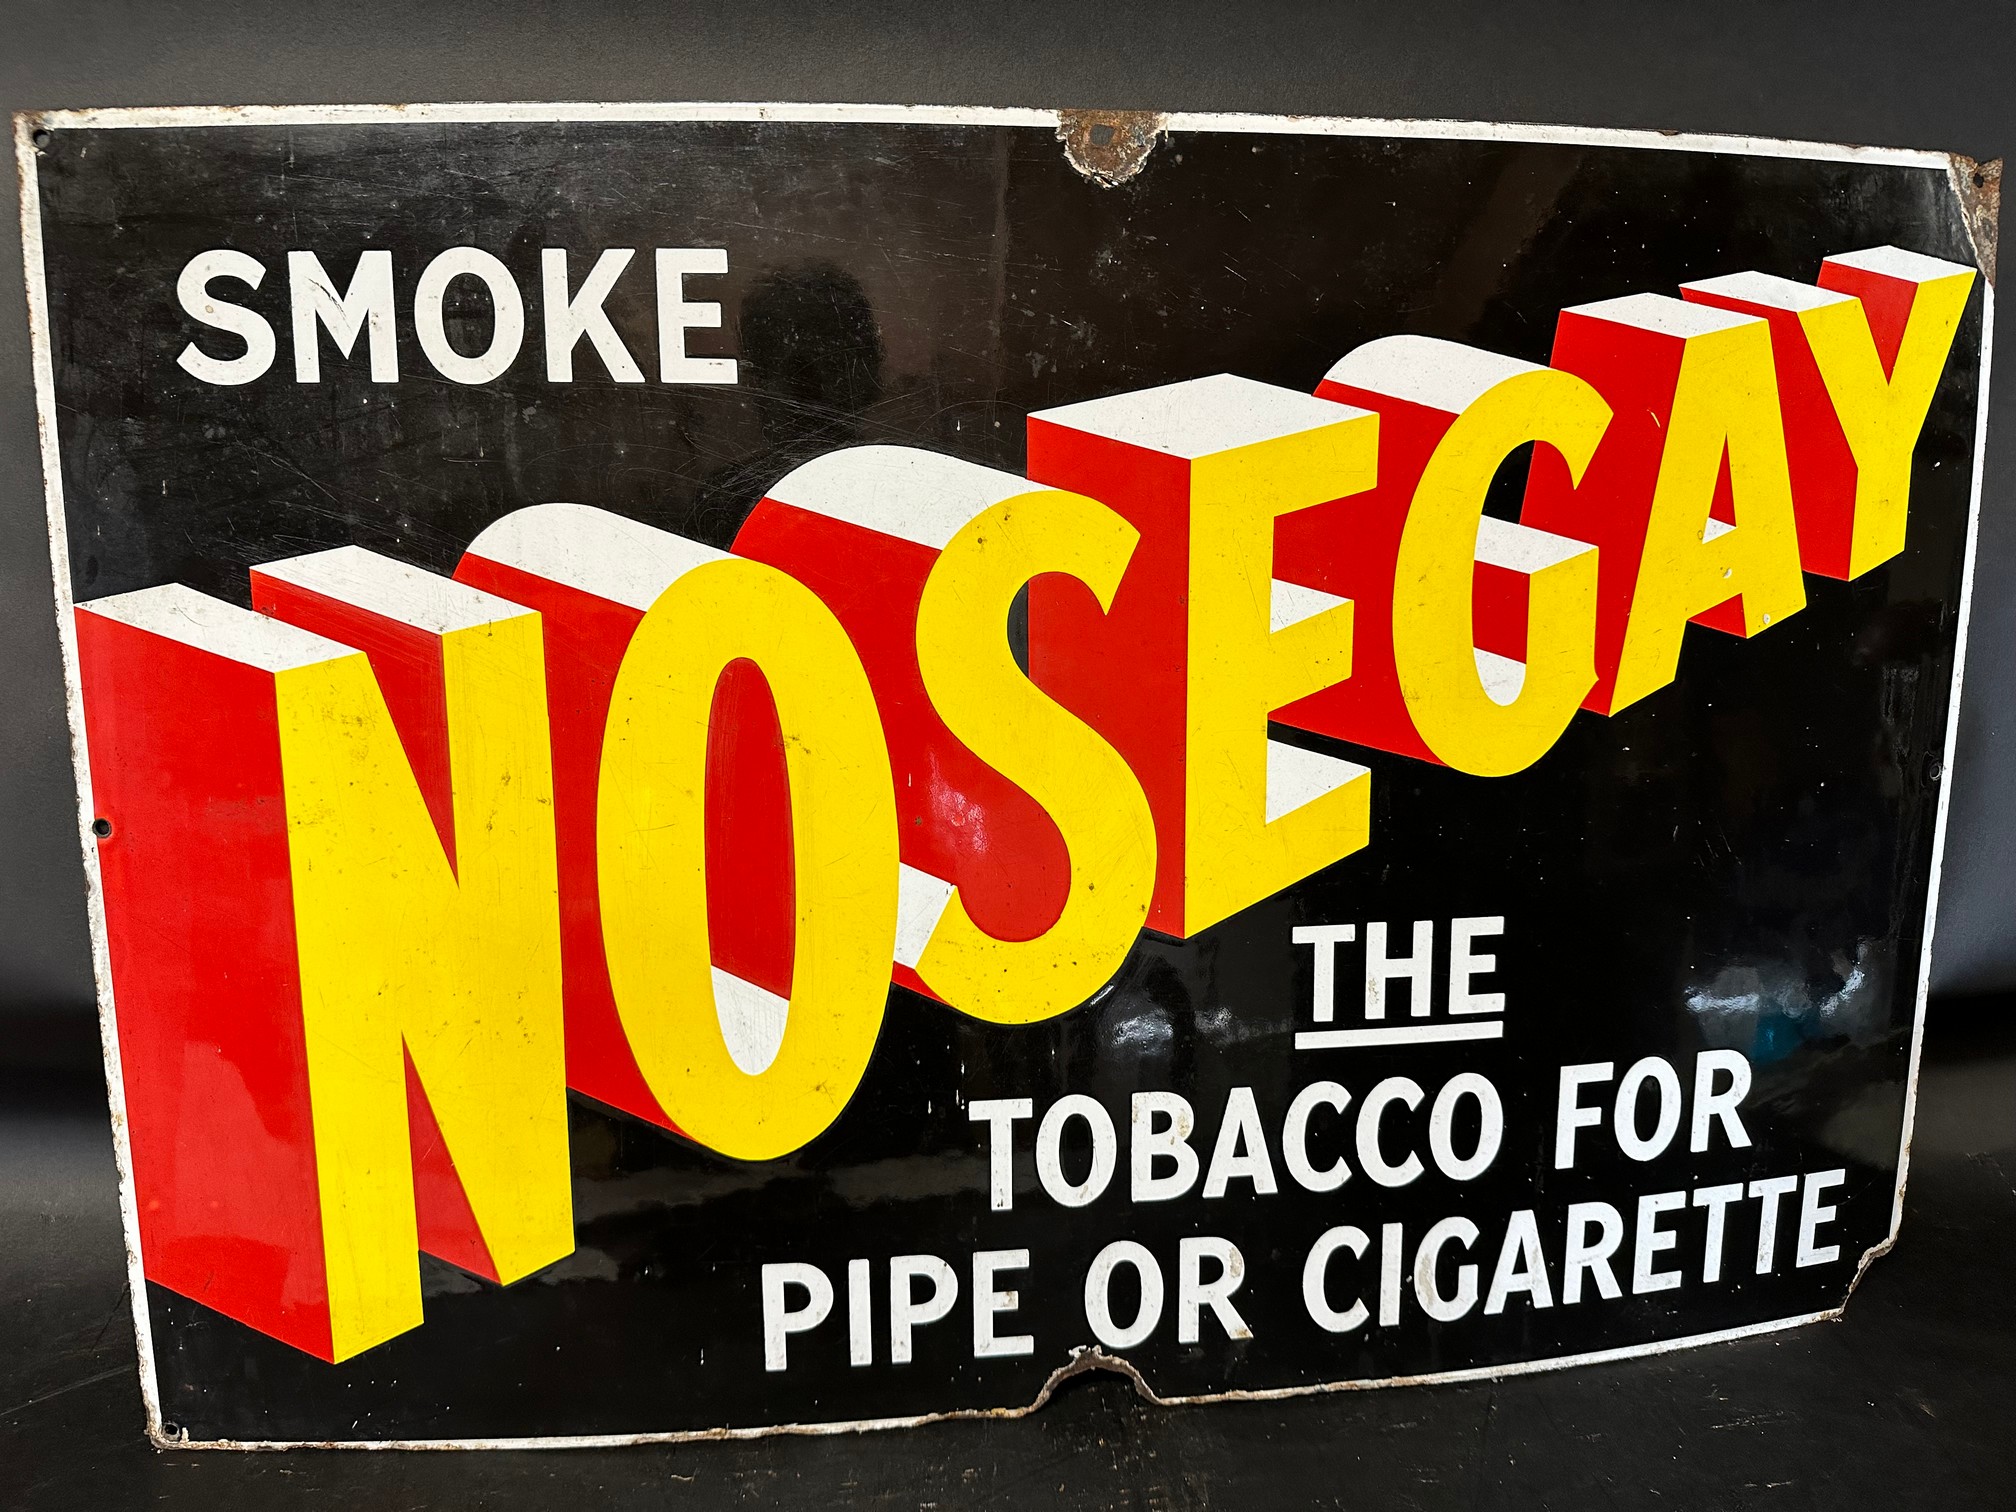 A 'Smoke Nosegay the Tobacco for Pipe or Cigarette' graphic enamel advertising sign, 30 x 20".